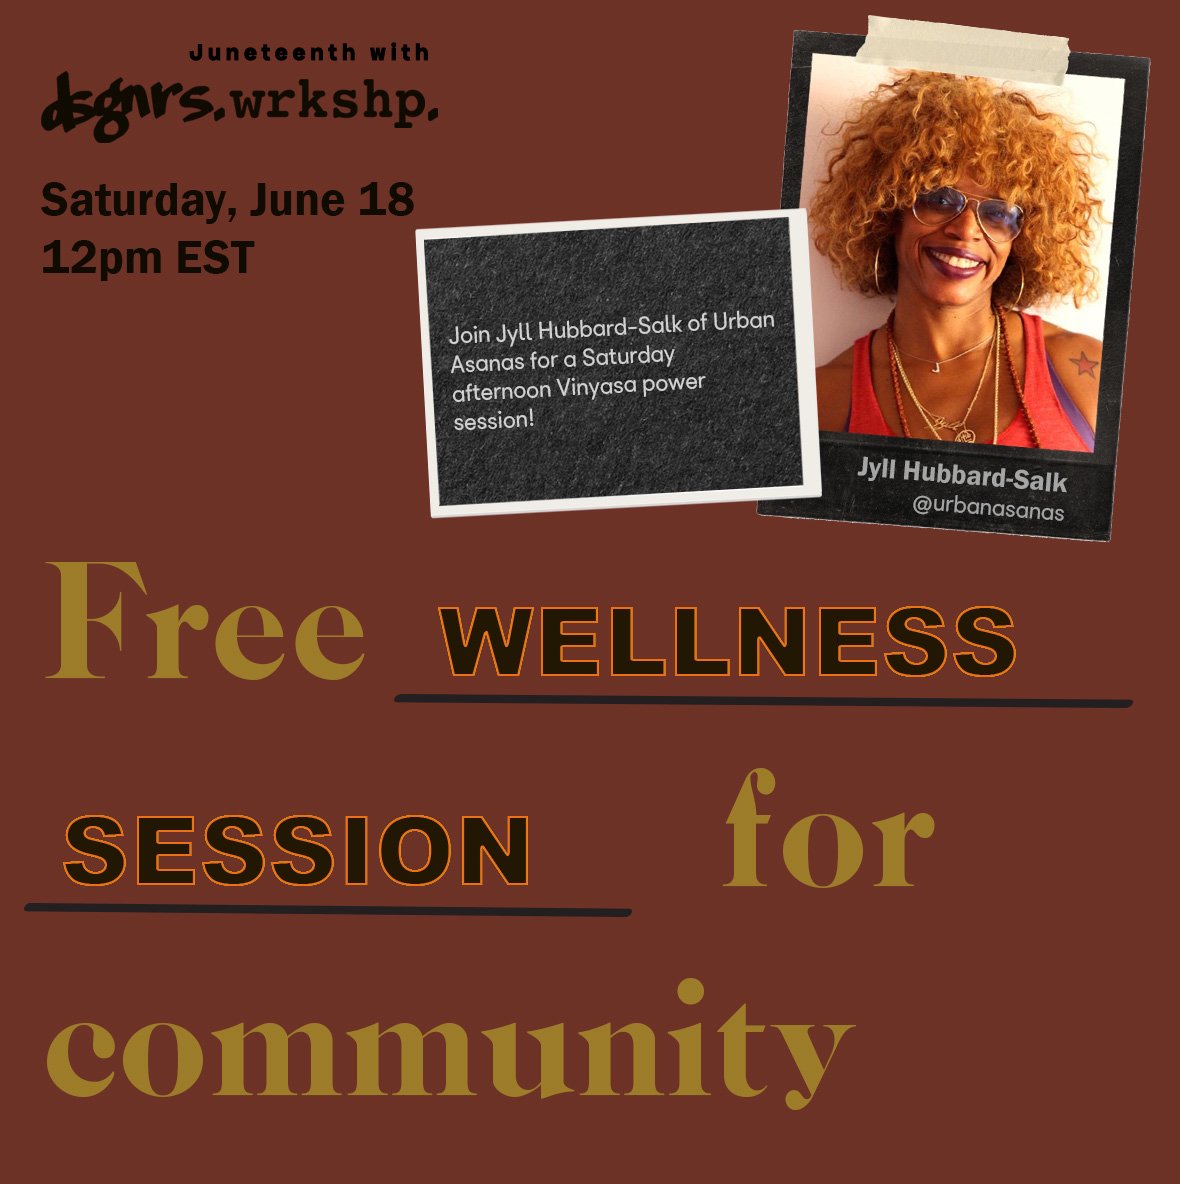  Juneteenth with DSGNRS! Bring your yoga mat, towel as we celebrate community, healing and liberation through a Vinyasa power flow with Jyll Hubbard-Salk, Owner of   Urban Asanas  . 